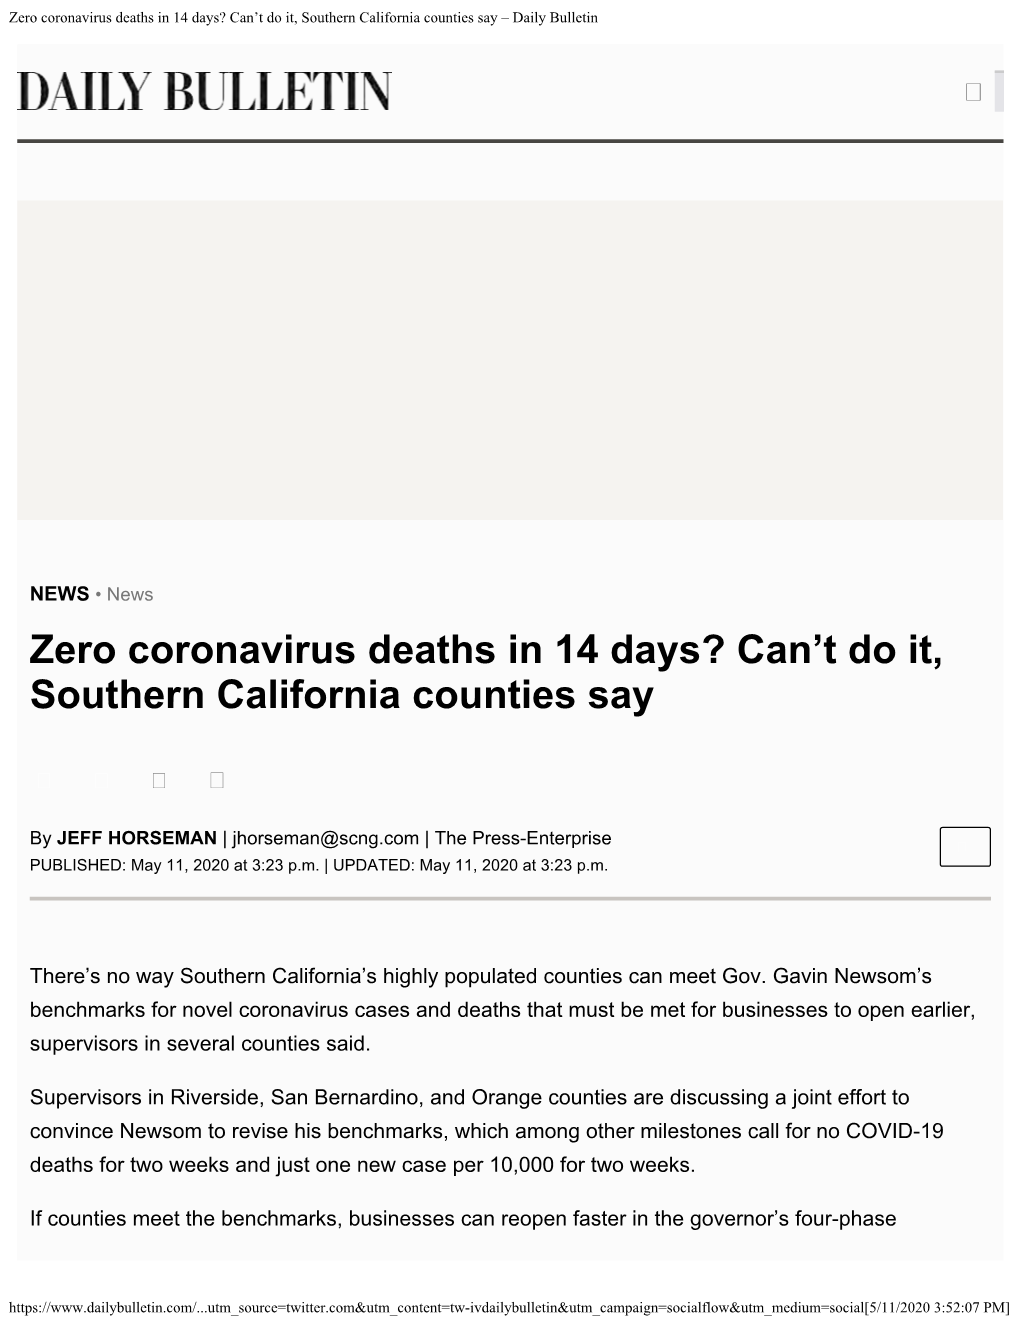 Zero Coronavirus Deaths in 14 Days? Can't Do It, Southern California Counties